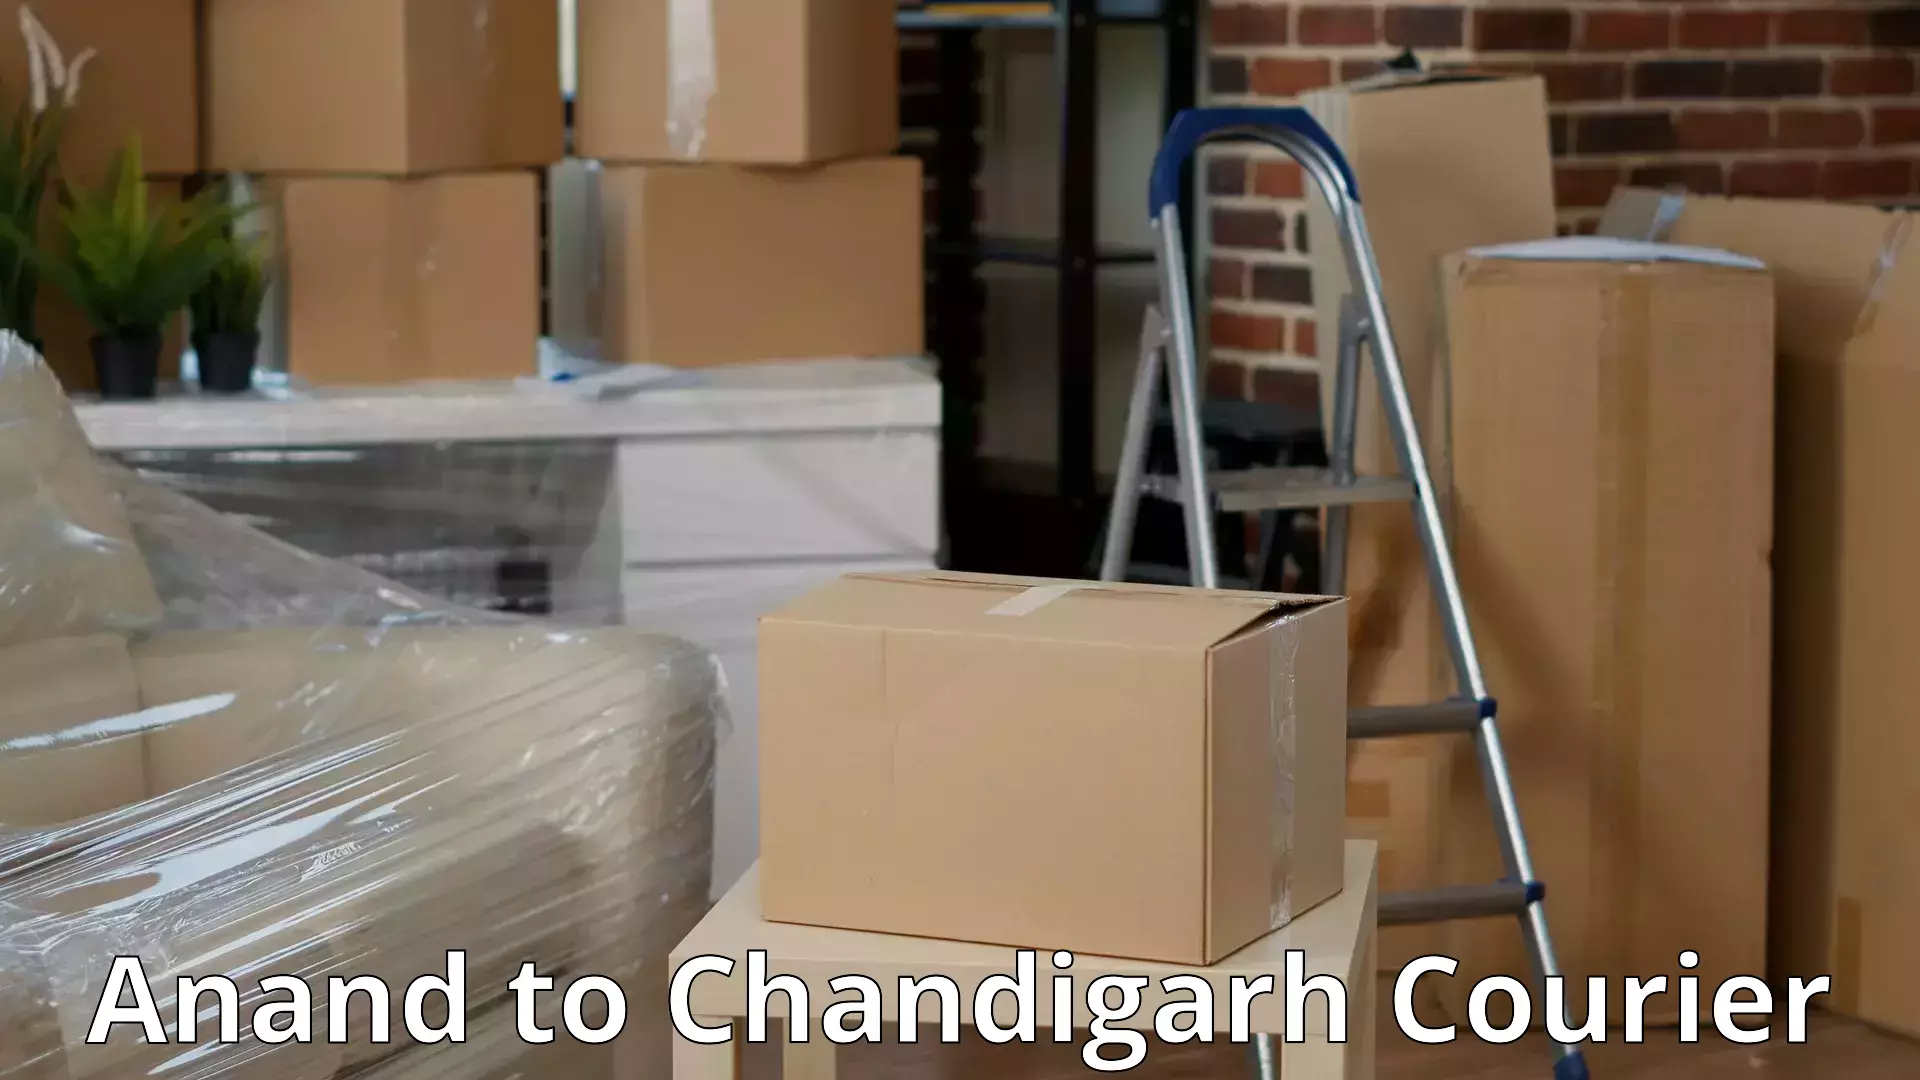 Cost-effective moving options Anand to Chandigarh